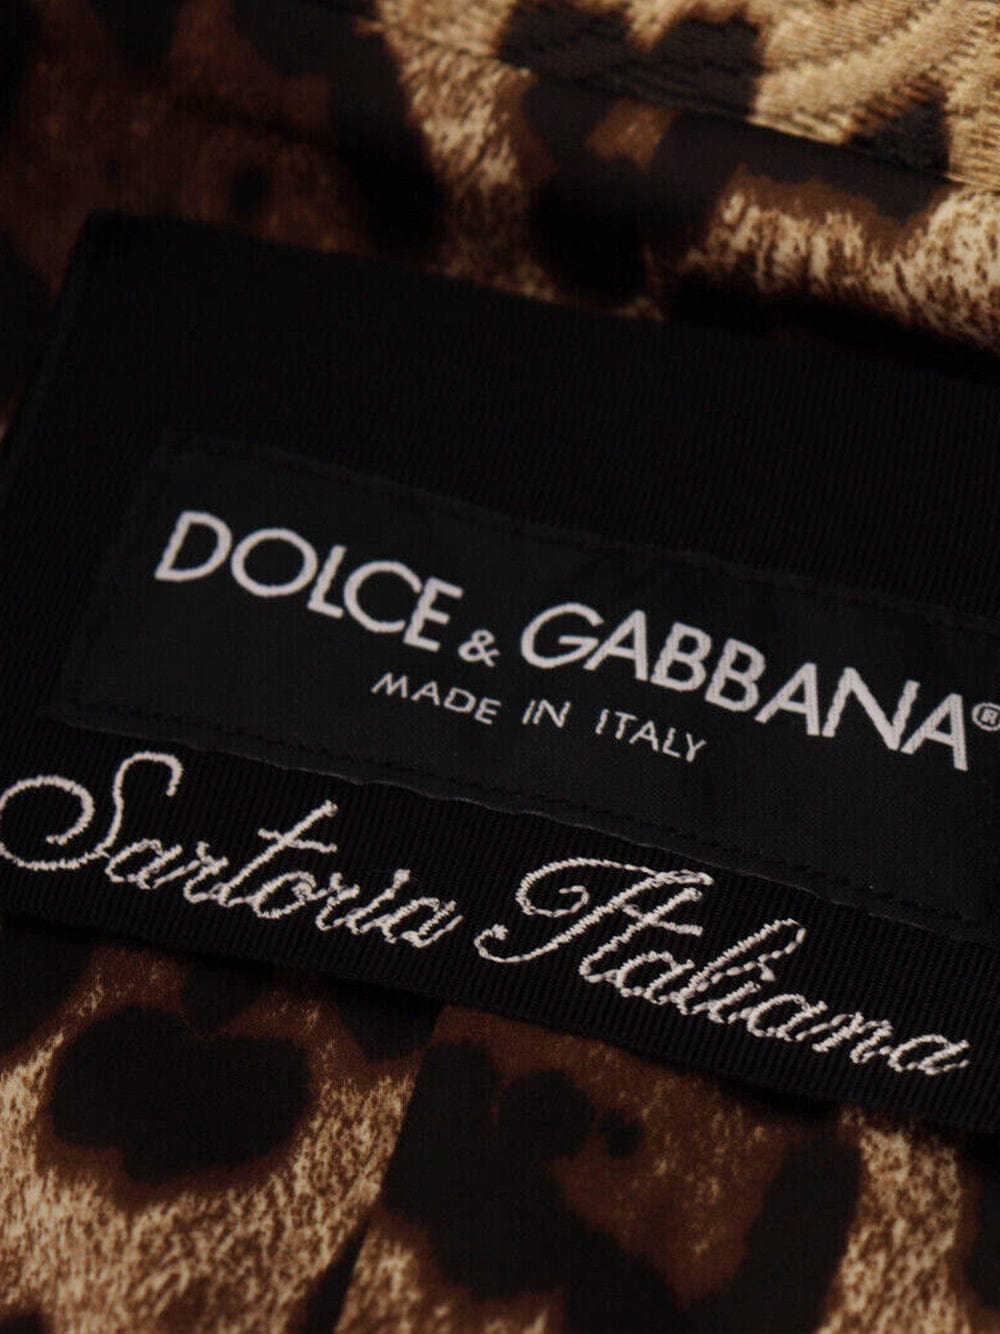 Dolce & Gabbana Leopard-Print Double-Breasted Trench Coat